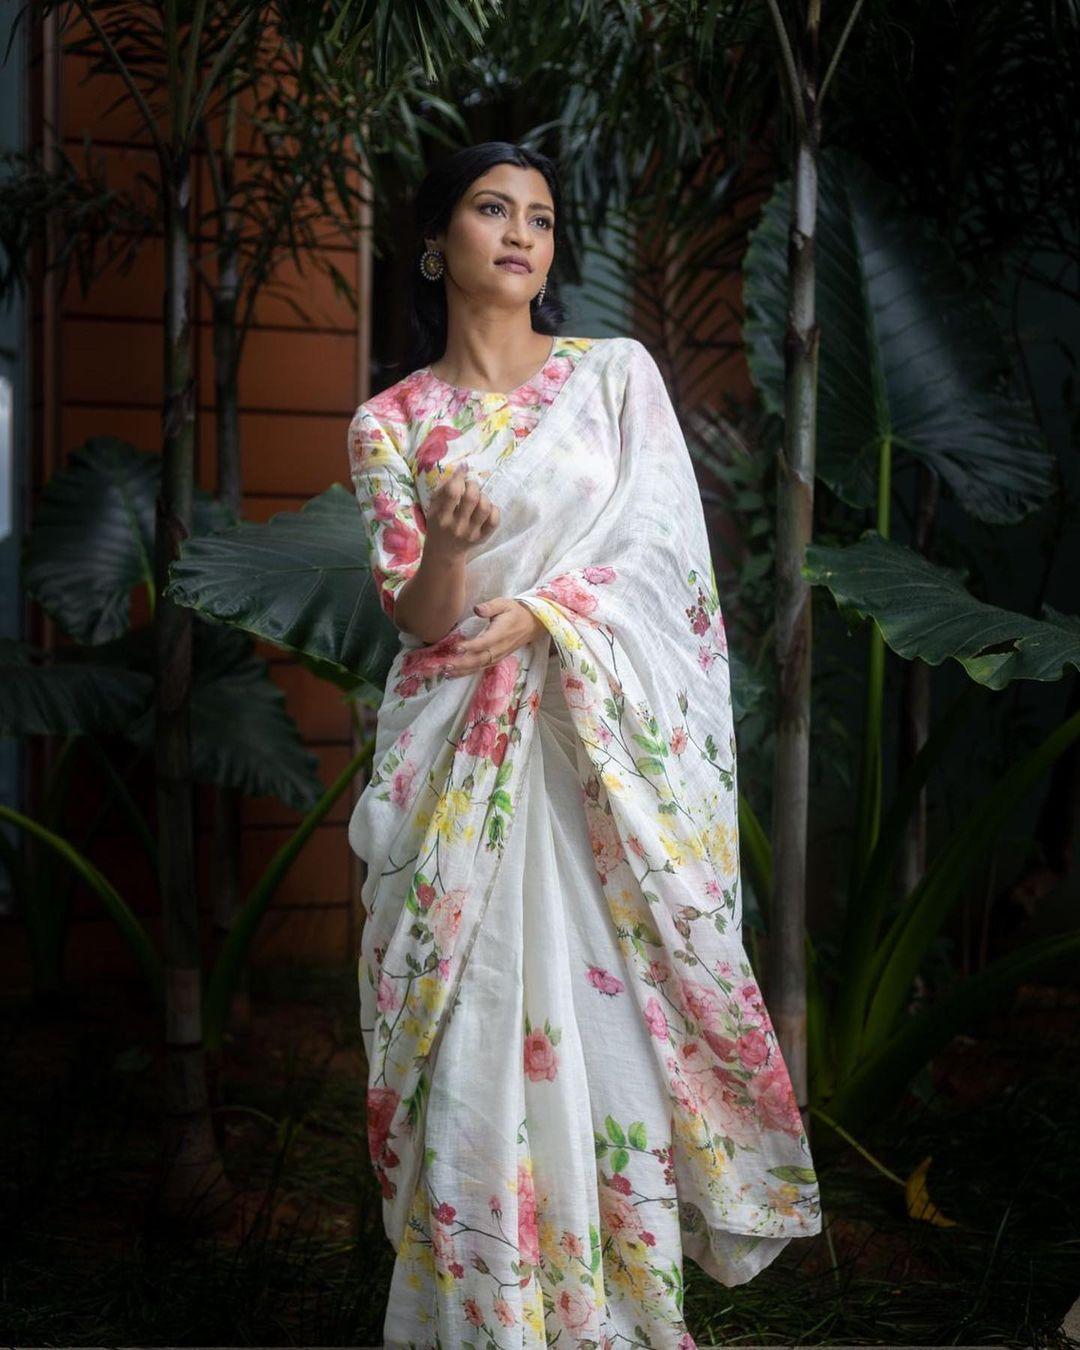 Konkona Sen Sharma stunned in this floral printed saree. She ditched the usual half blouse for this lovely half sleeved blouse